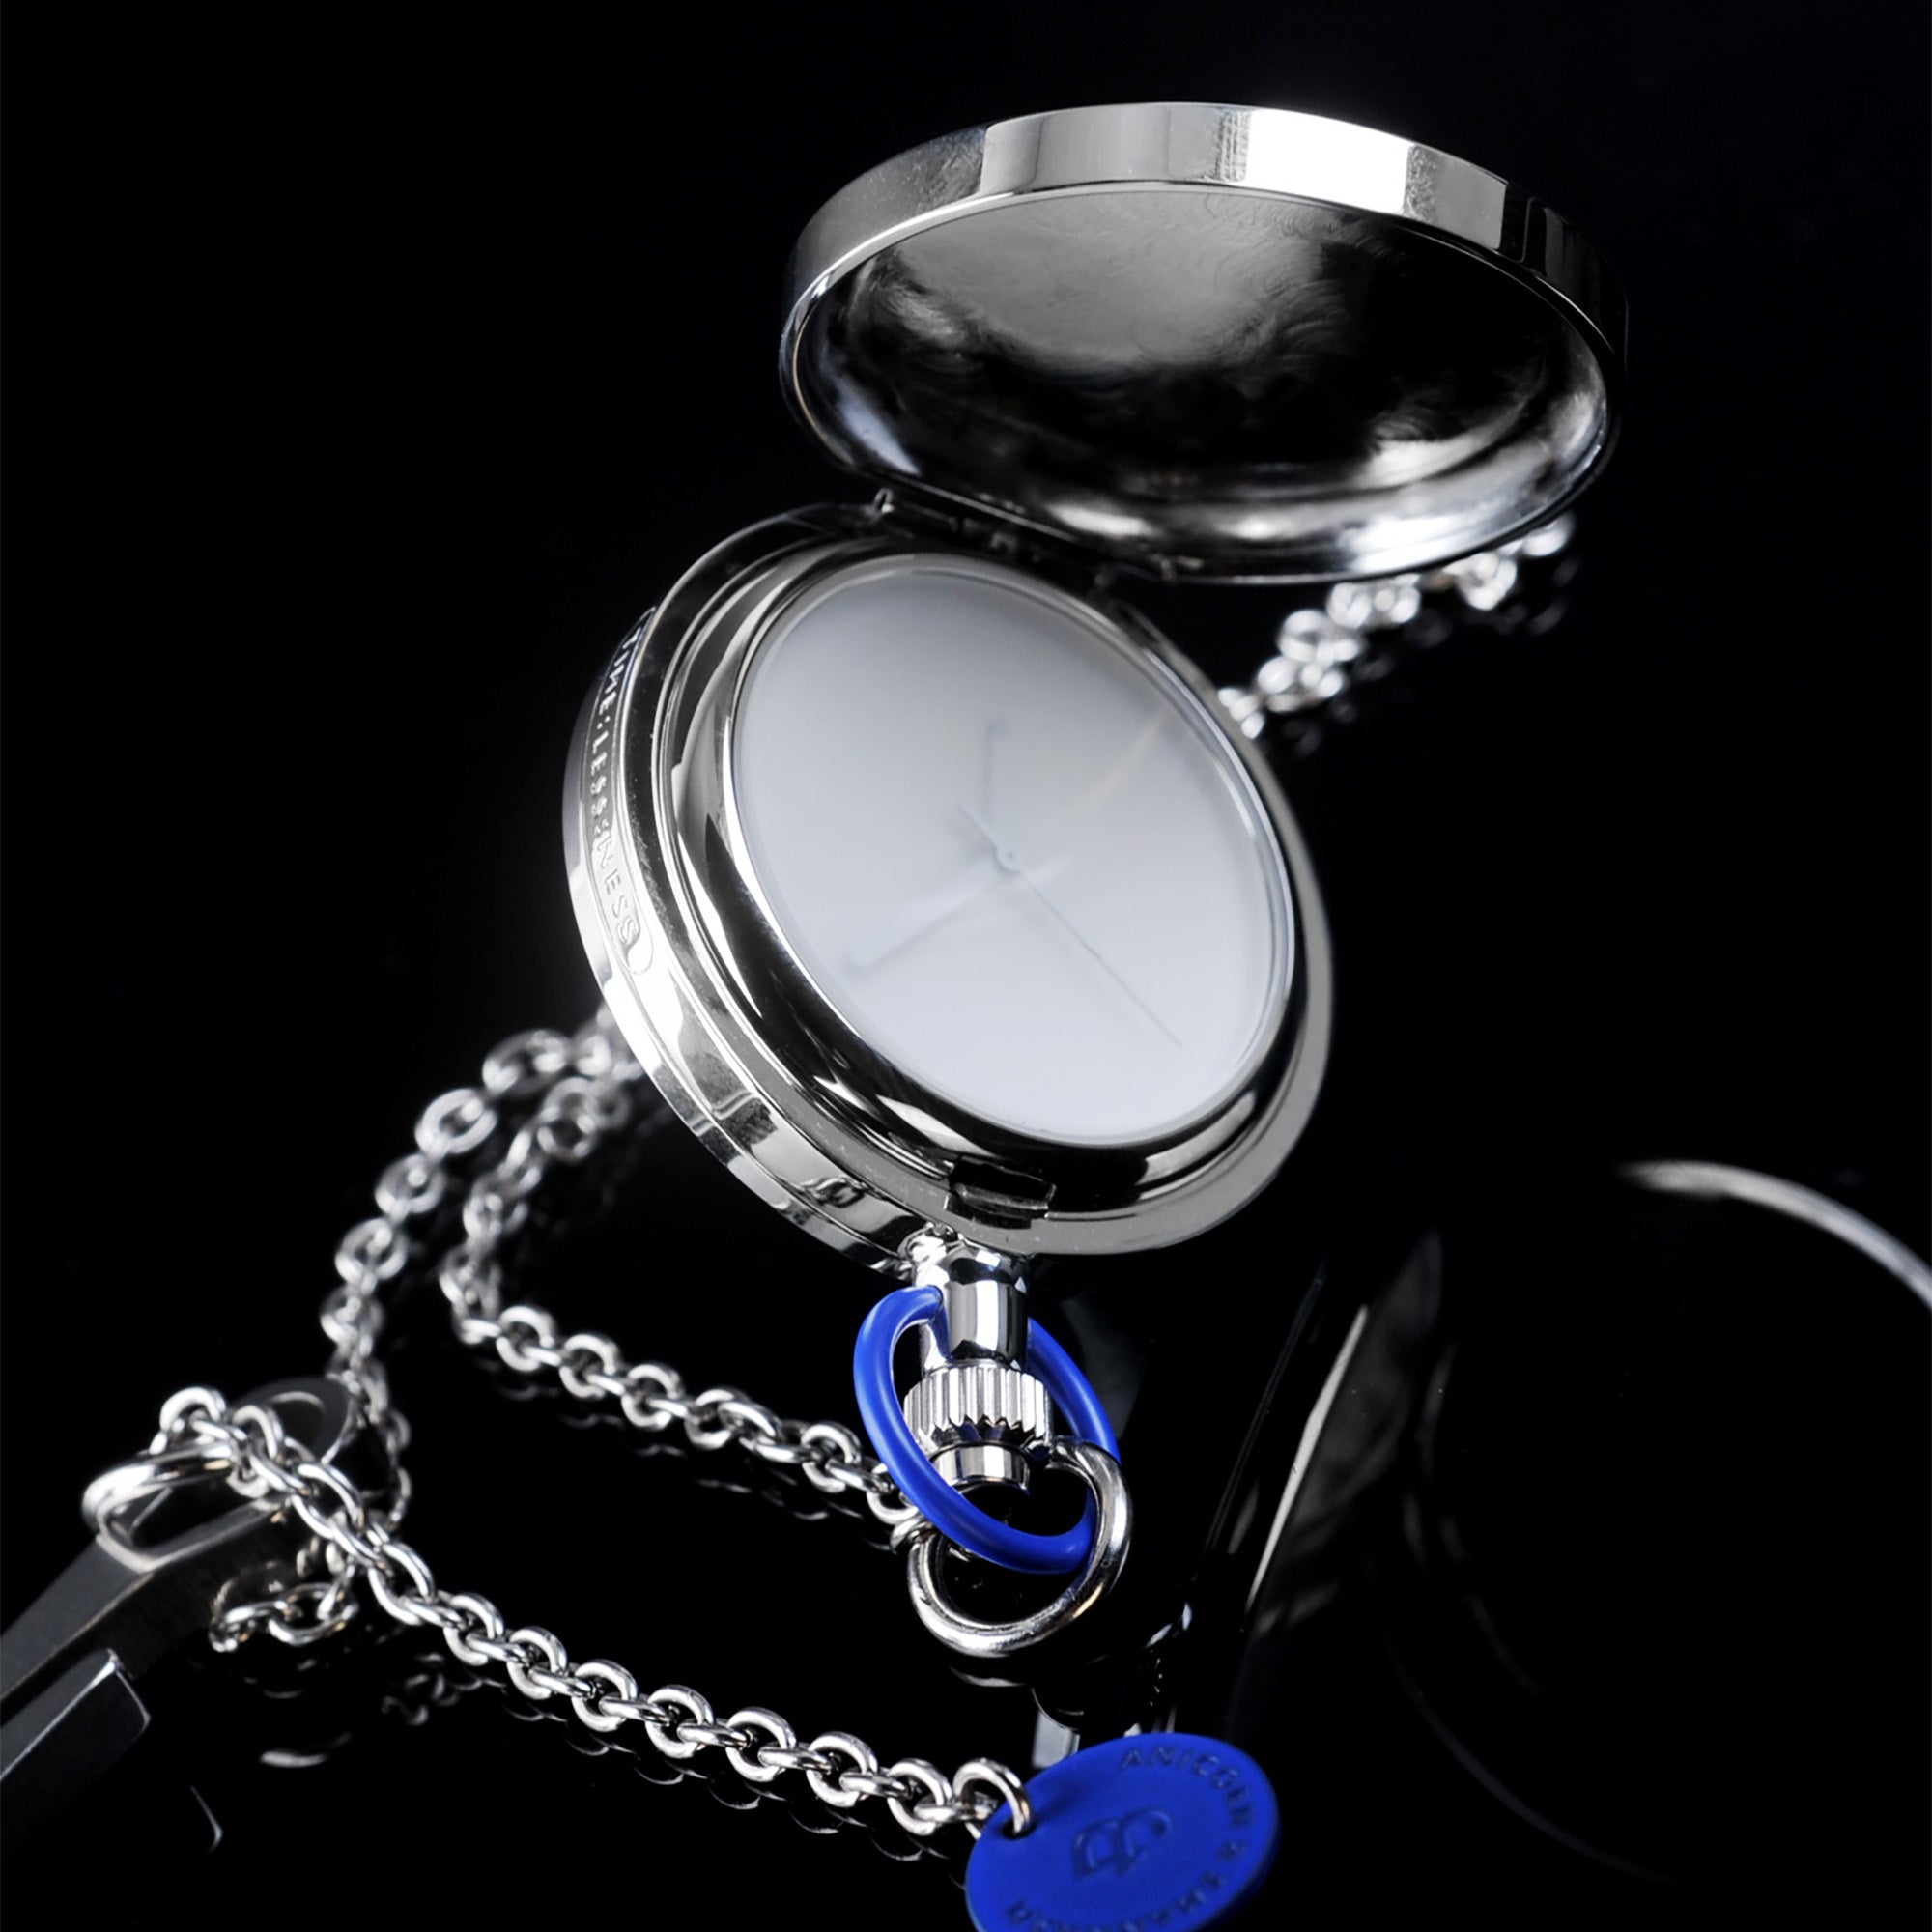 TIME:LESS:NESS - 1510 – The pocket watch (Pocket watch & necklace - Silver)